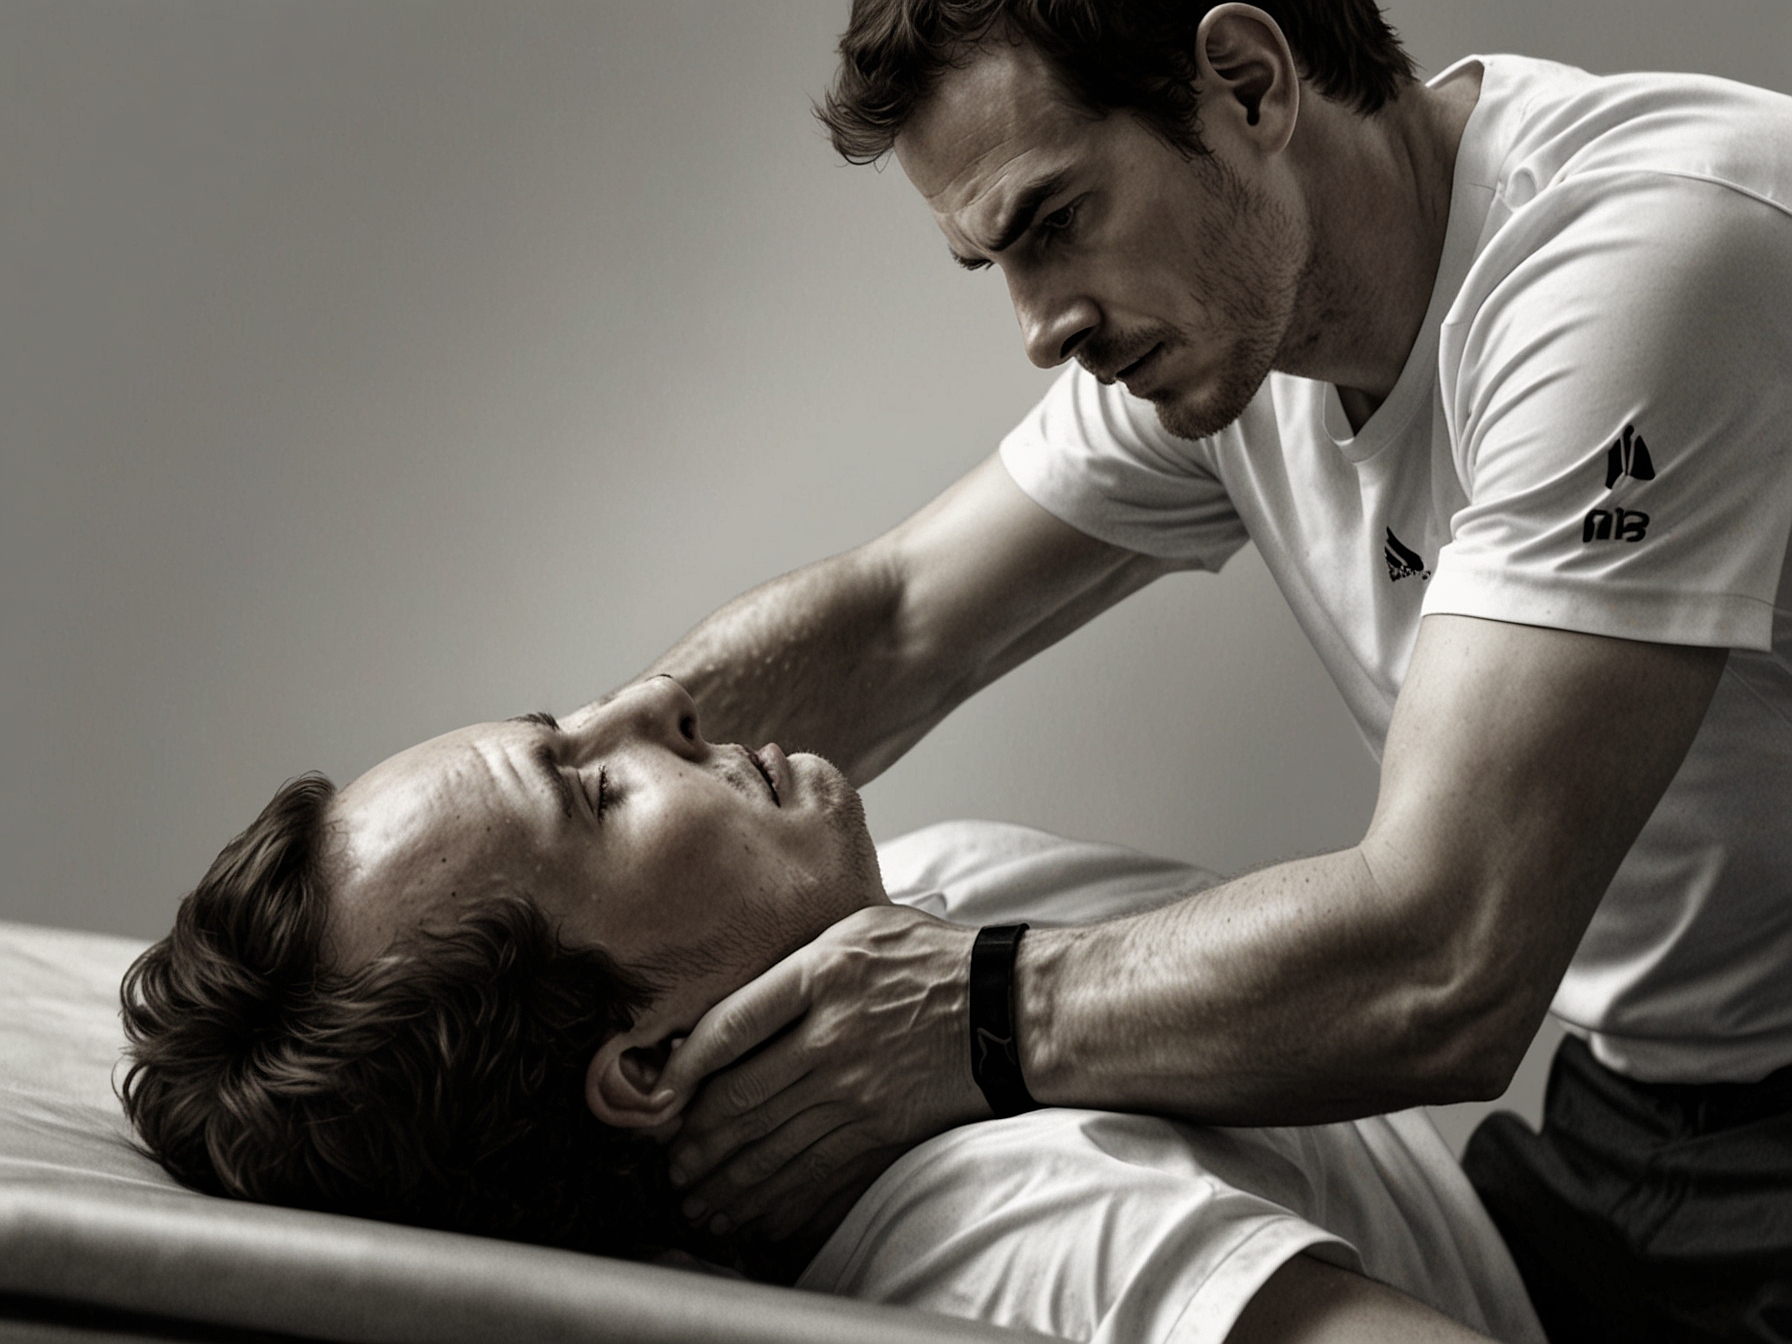 A close-up of Andy Murray in physiotherapy, highlighting the extensive measures and medical interventions taken to manage his recurring hip injury.